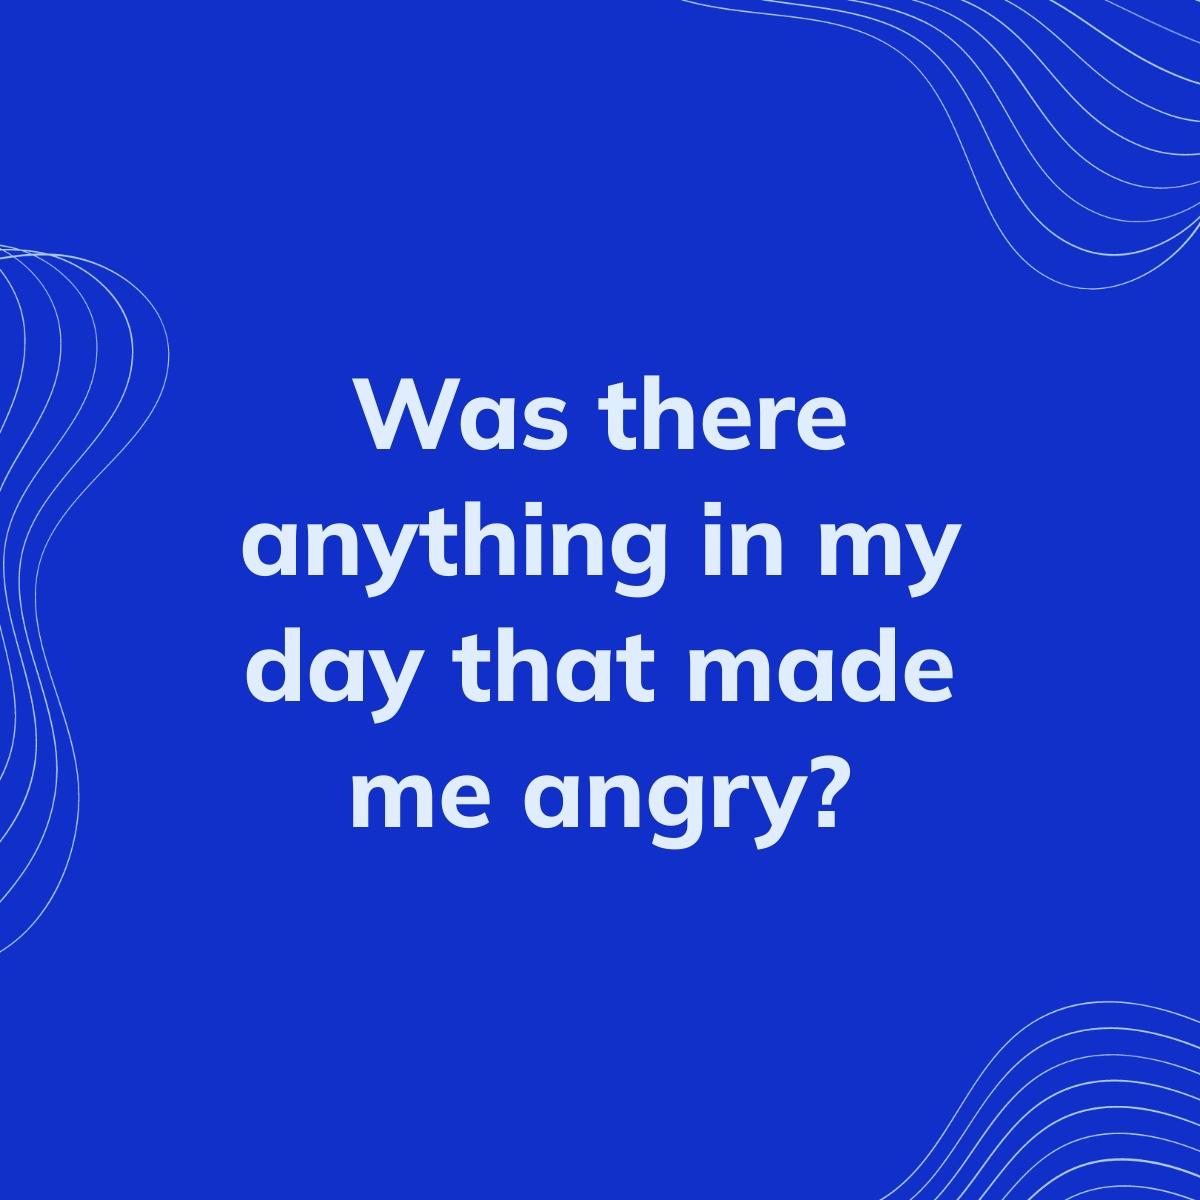 Journal Prompt: Was there anything in my day that made me angry?